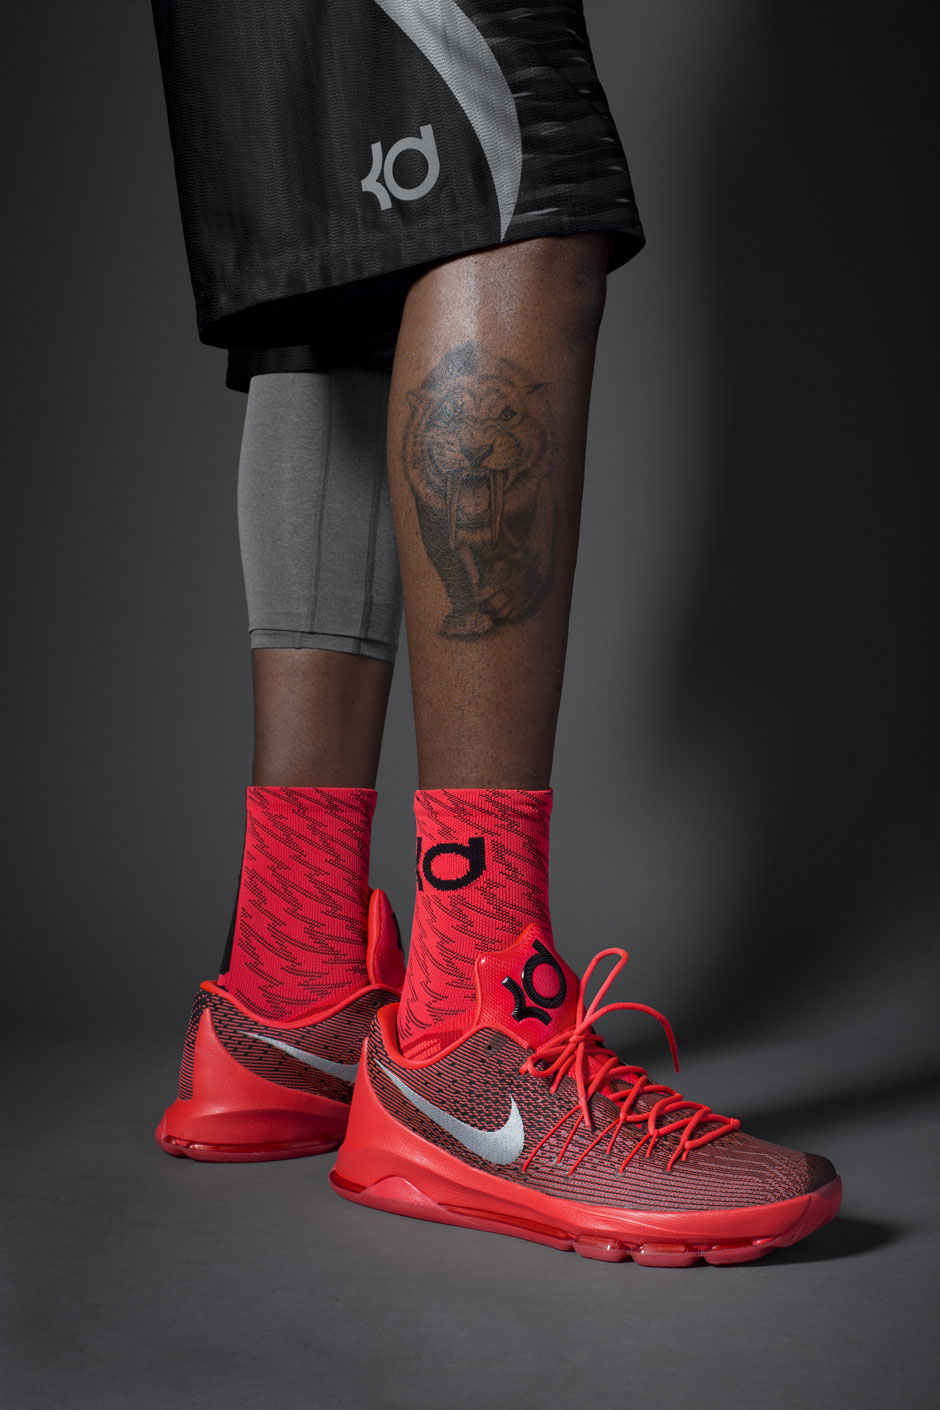 Kd 8 Unveiled 12